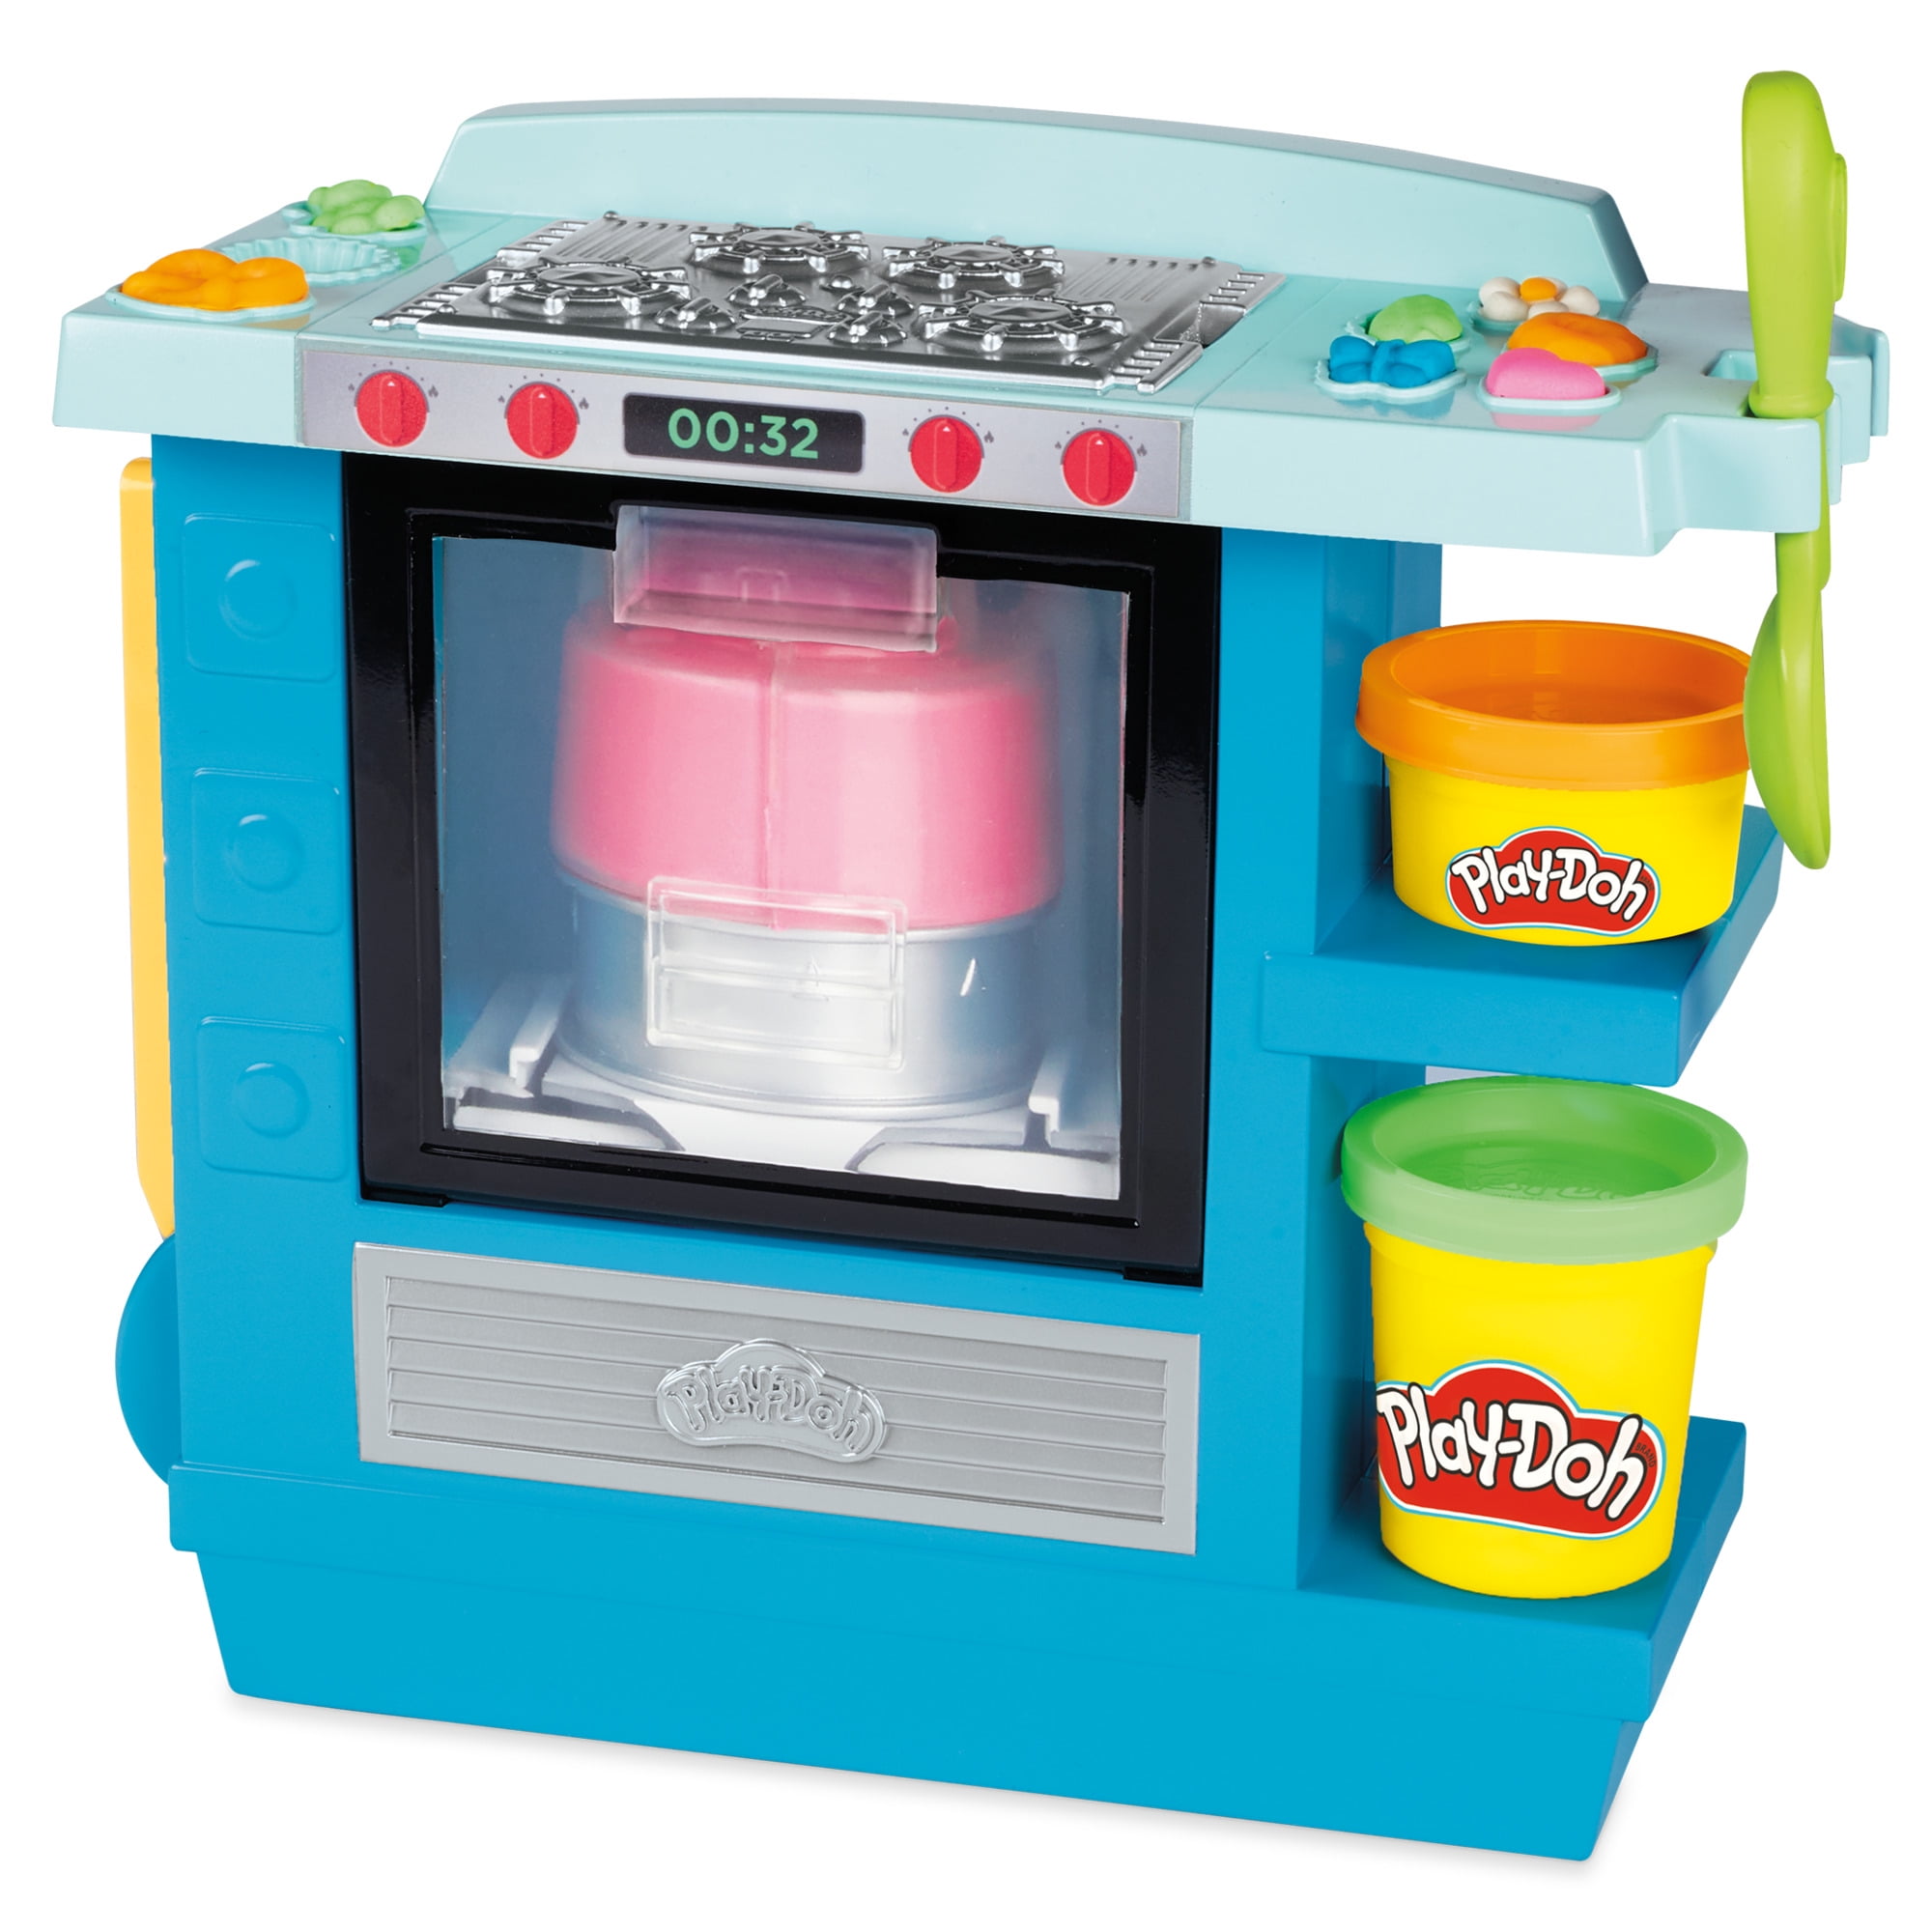 Play-Doh Kitchen Creations Rising Cake Oven Playset, Includes 5 